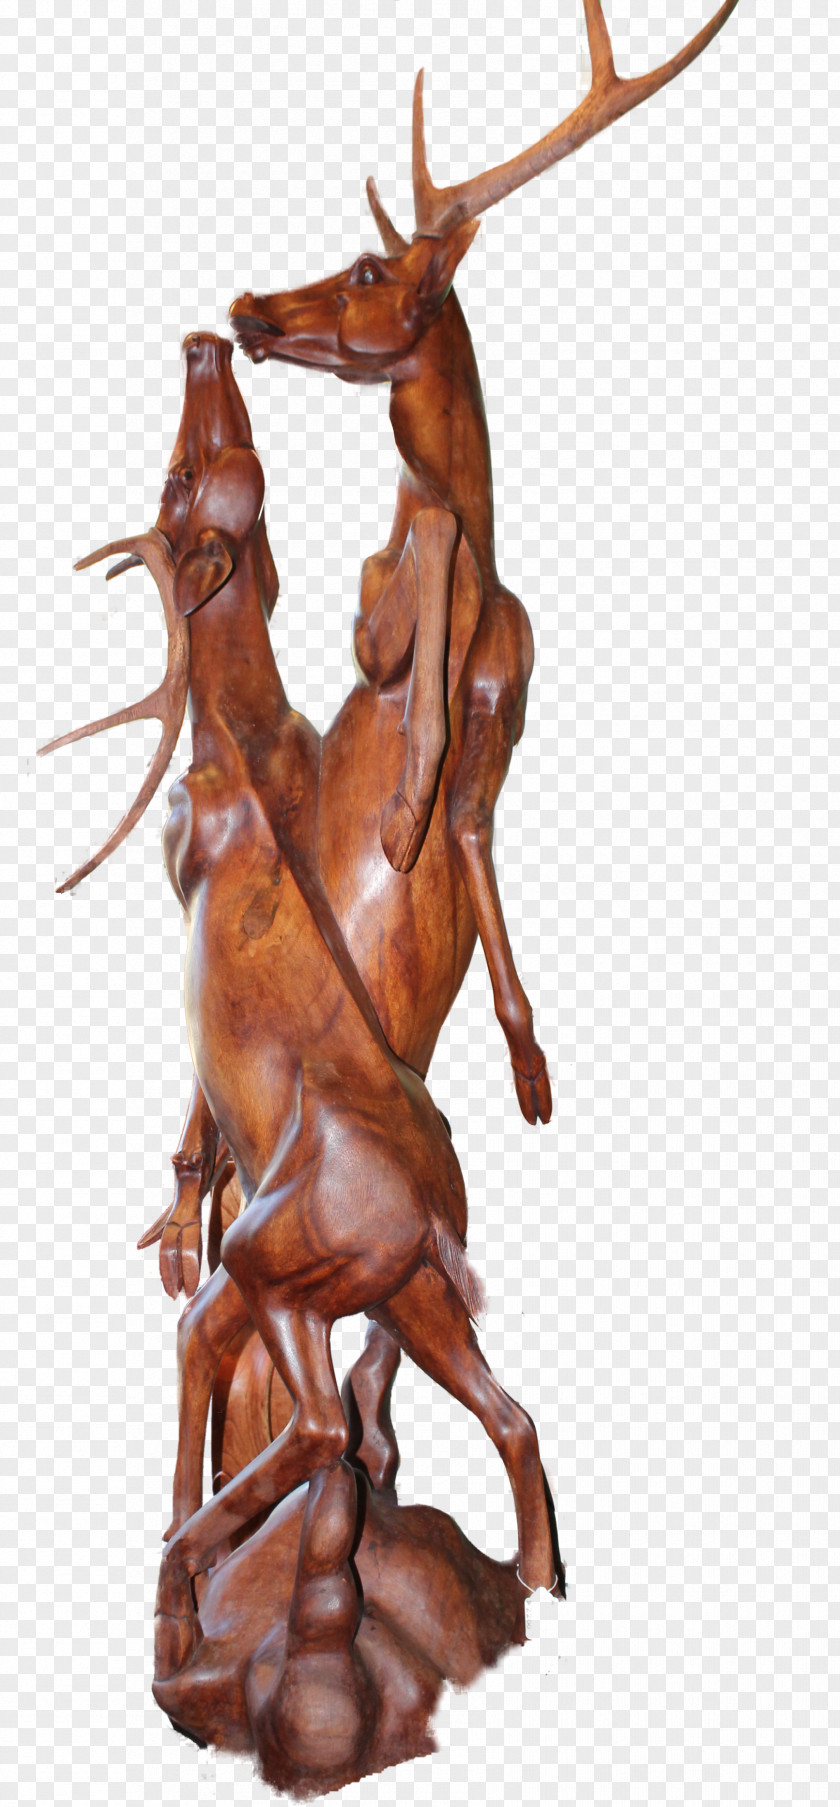 Woodcarving Wood Carving Sculpture PNG